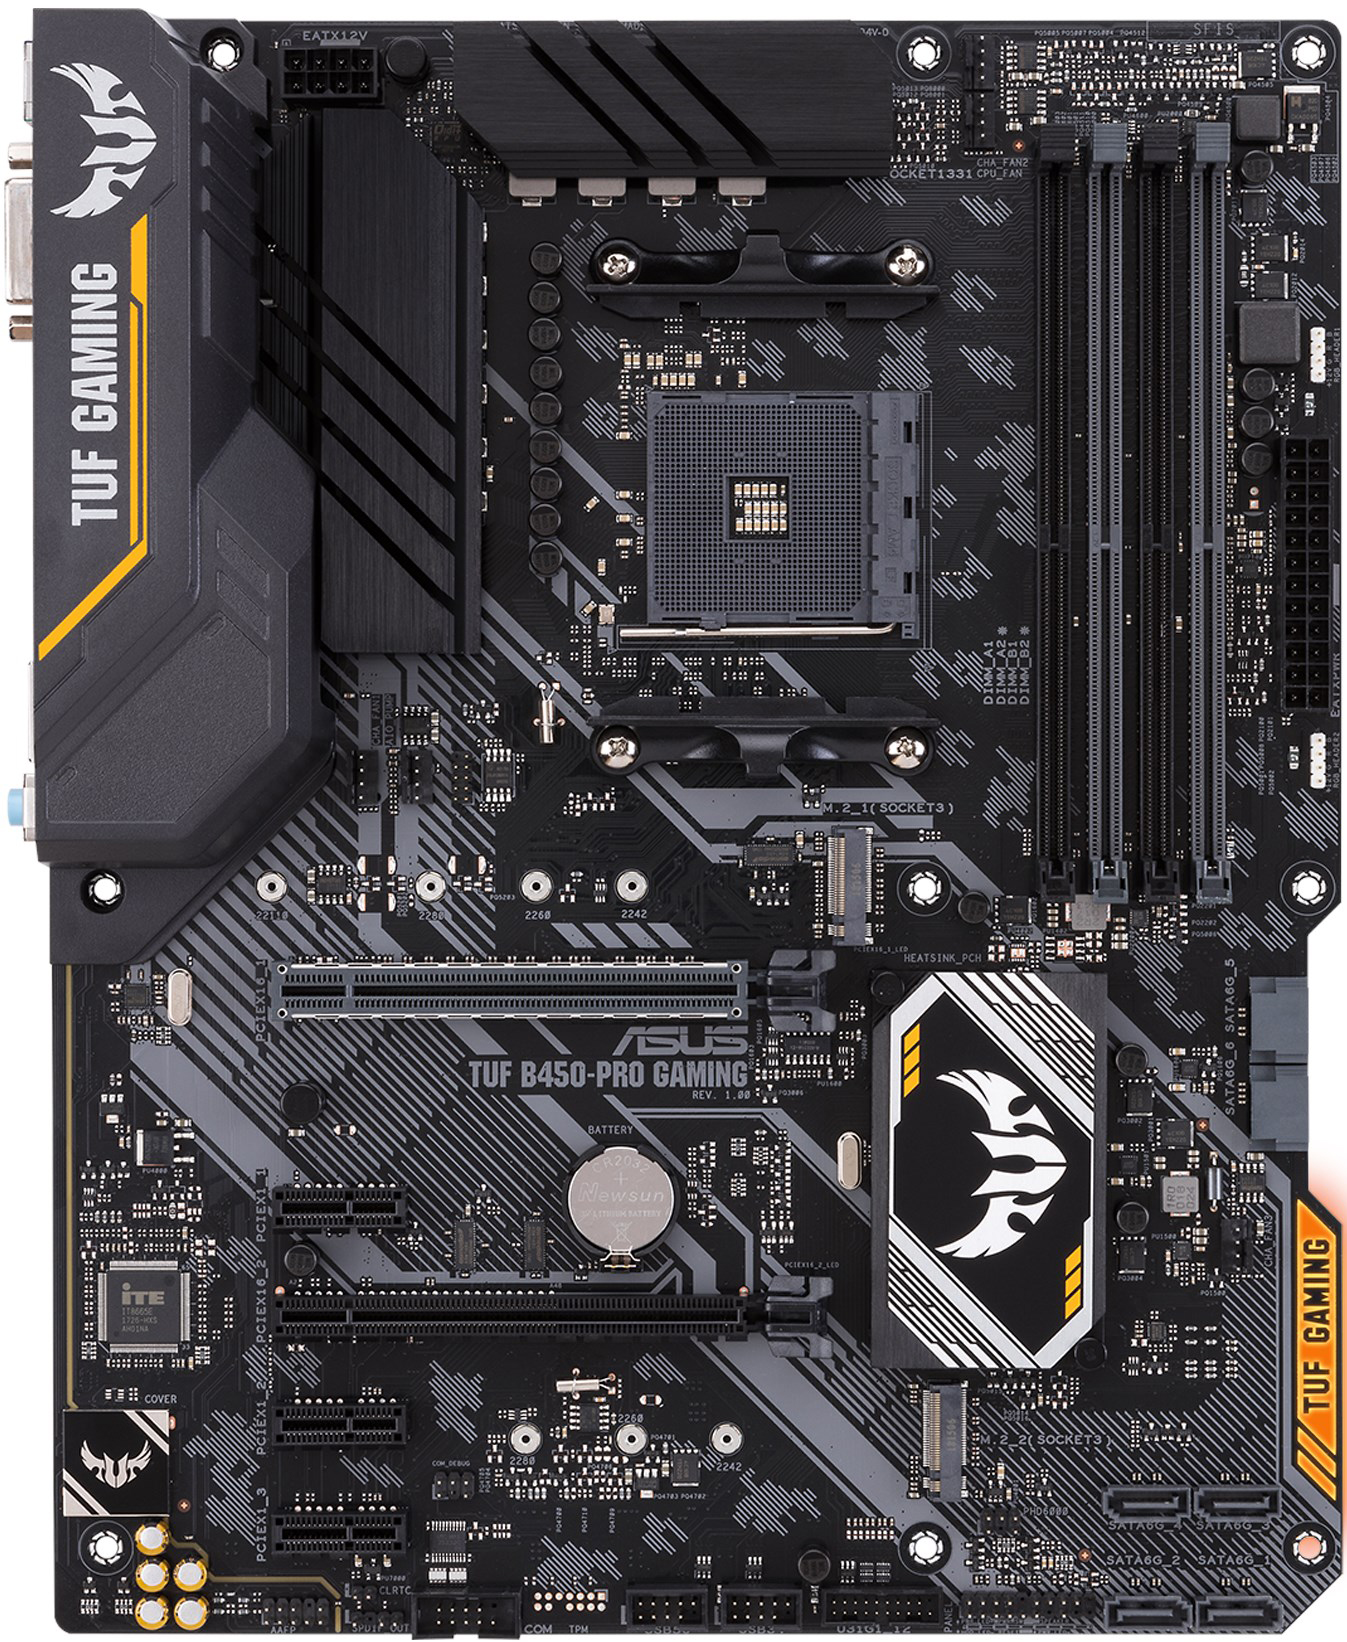 Asus Tuf B450 Pro Gaming Motherboard Specifications On Motherboarddb